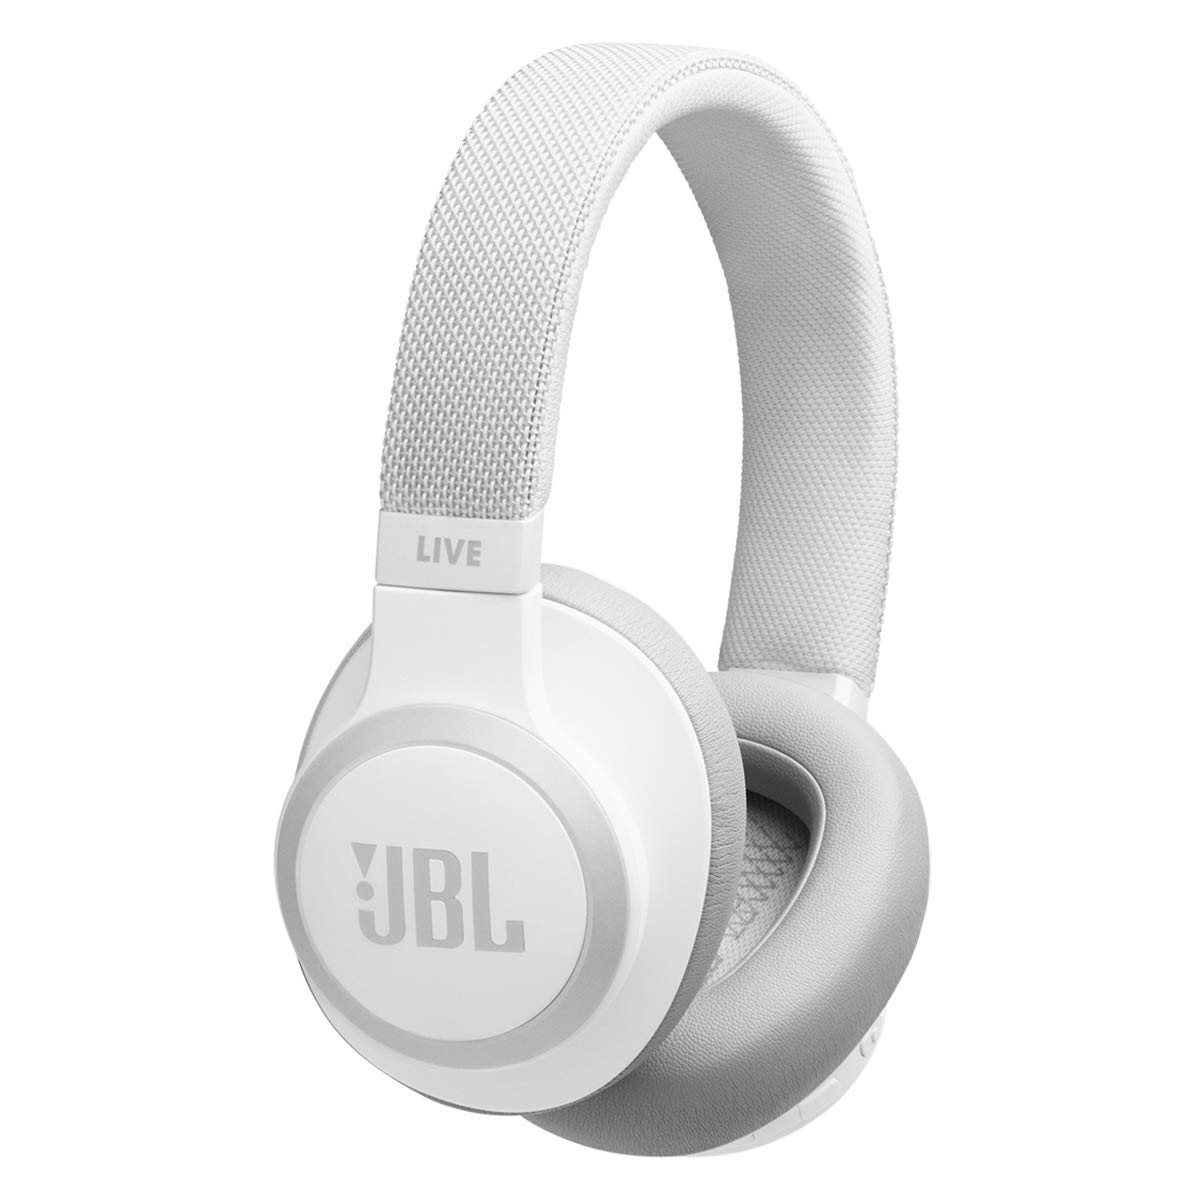 JBL Live 650 BT NC, Around-Ear Wireless Headphone with Noise Cancellation – White